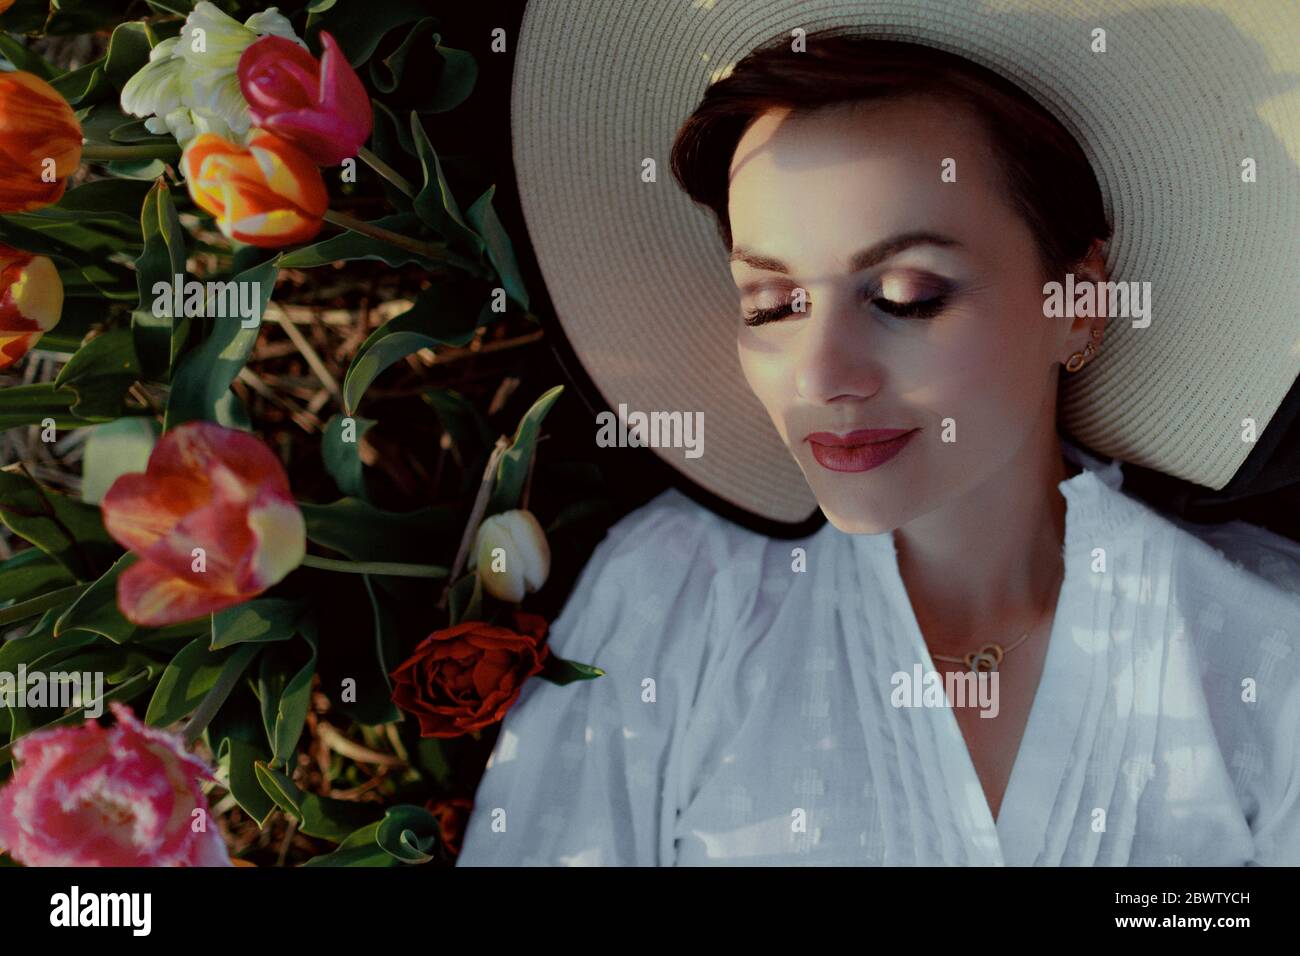 Portrait of woman with eyes closed wearing hat lying on ground between tulips Stock Photo